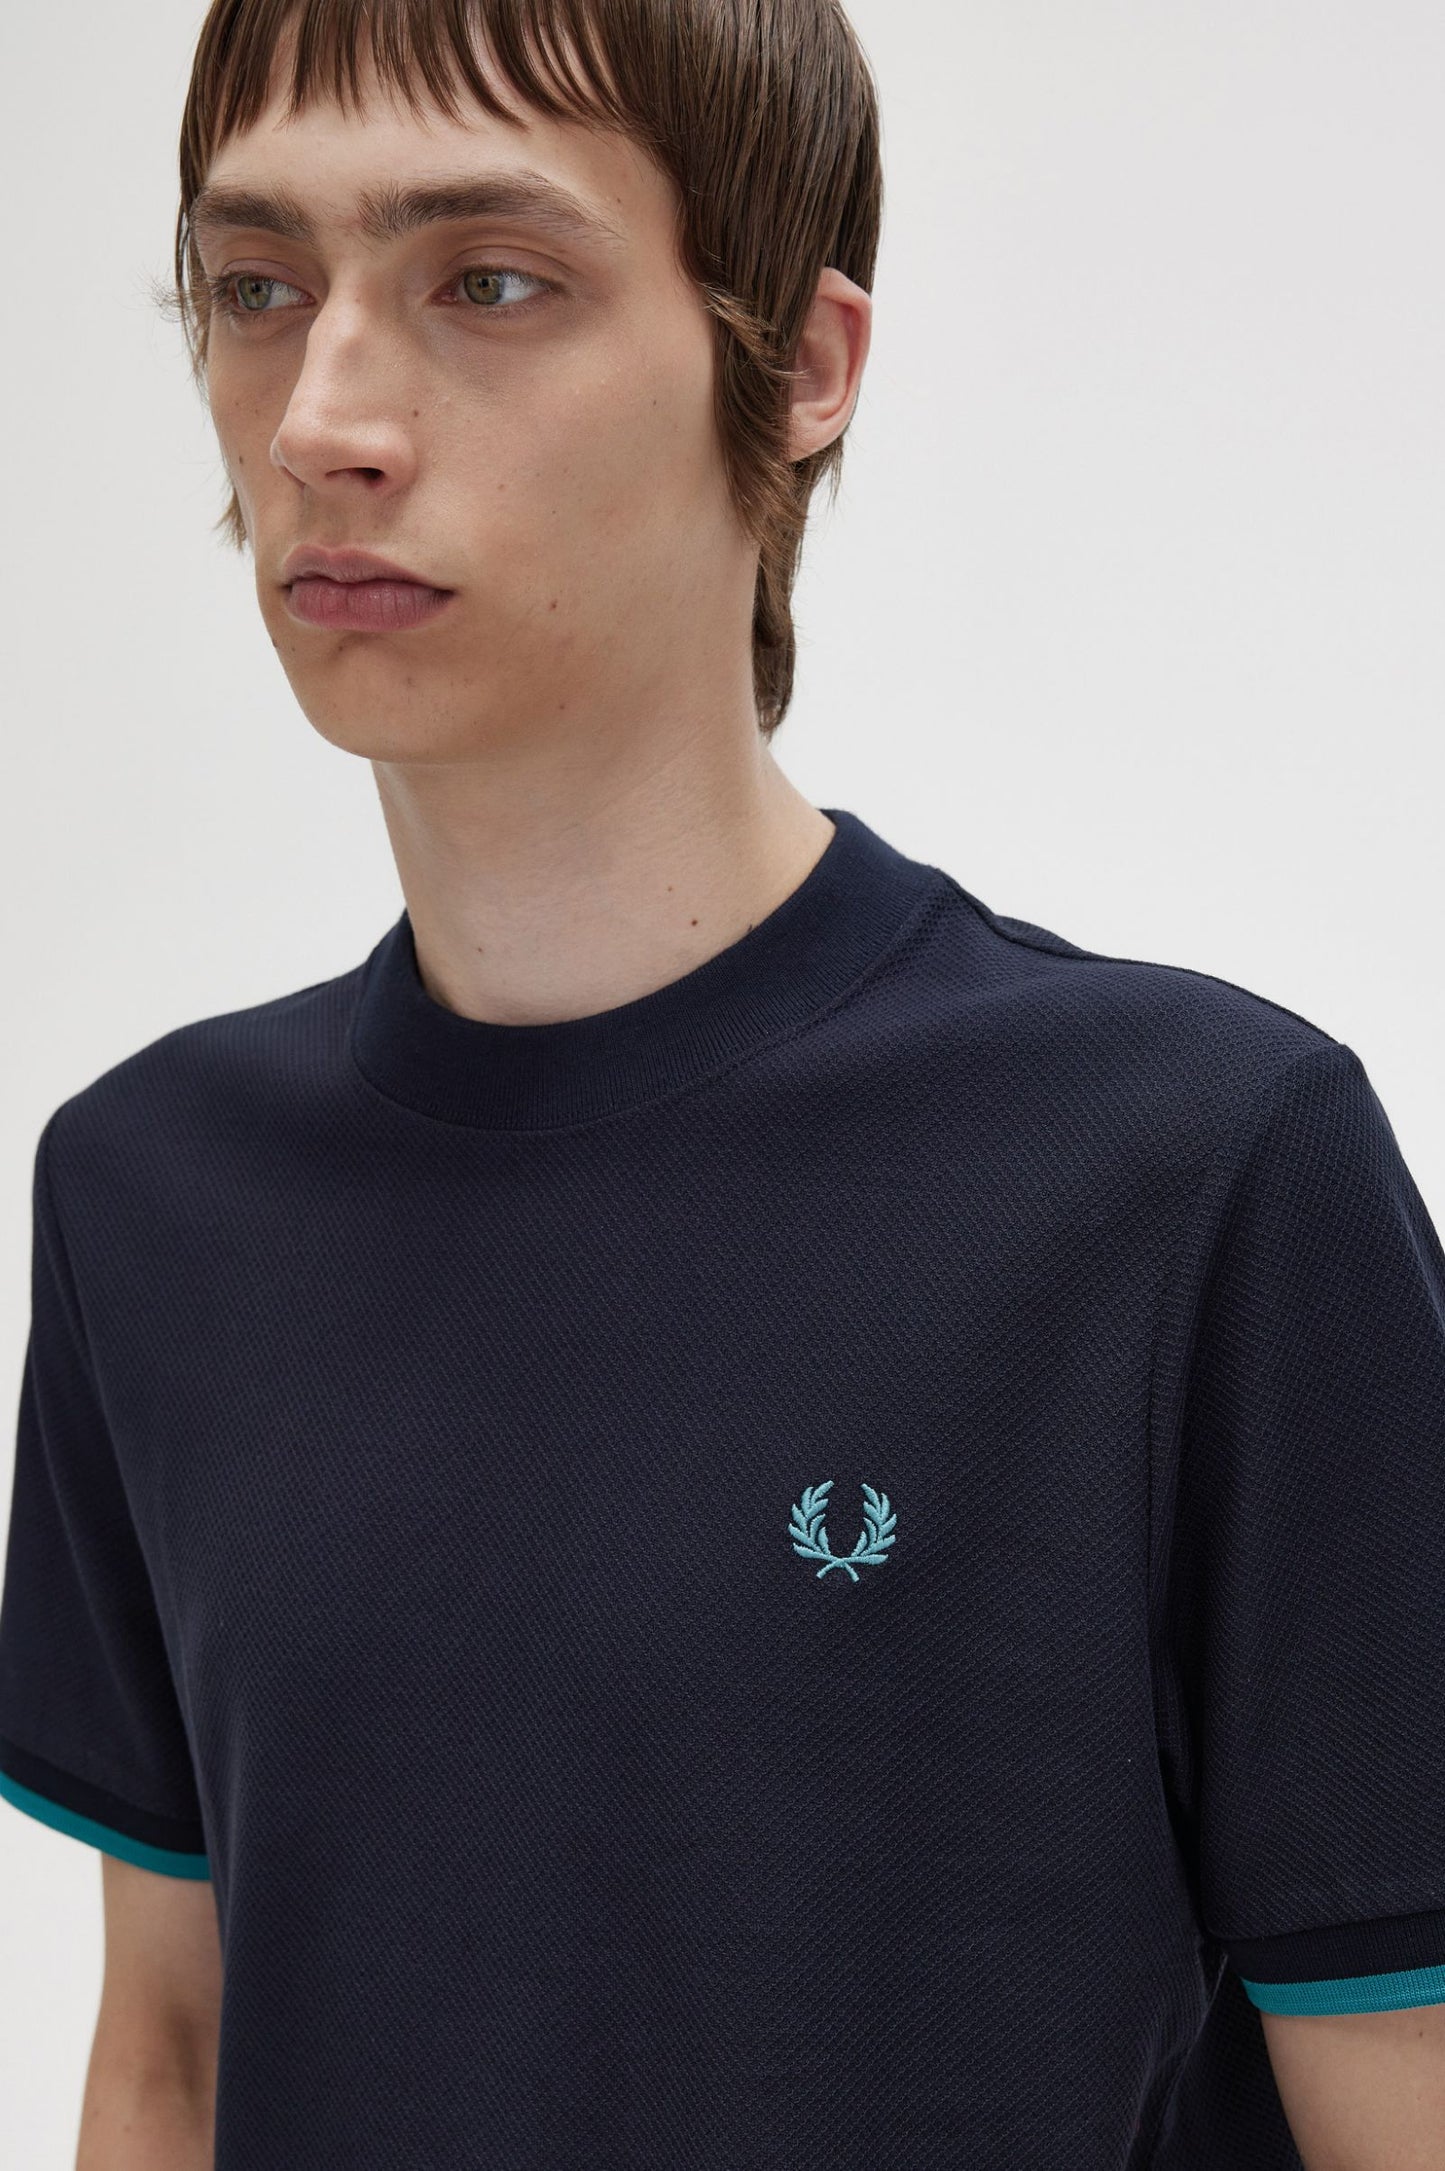 Fred Perry Tipped Cuff Pique Shirt Navy / Deep Mint